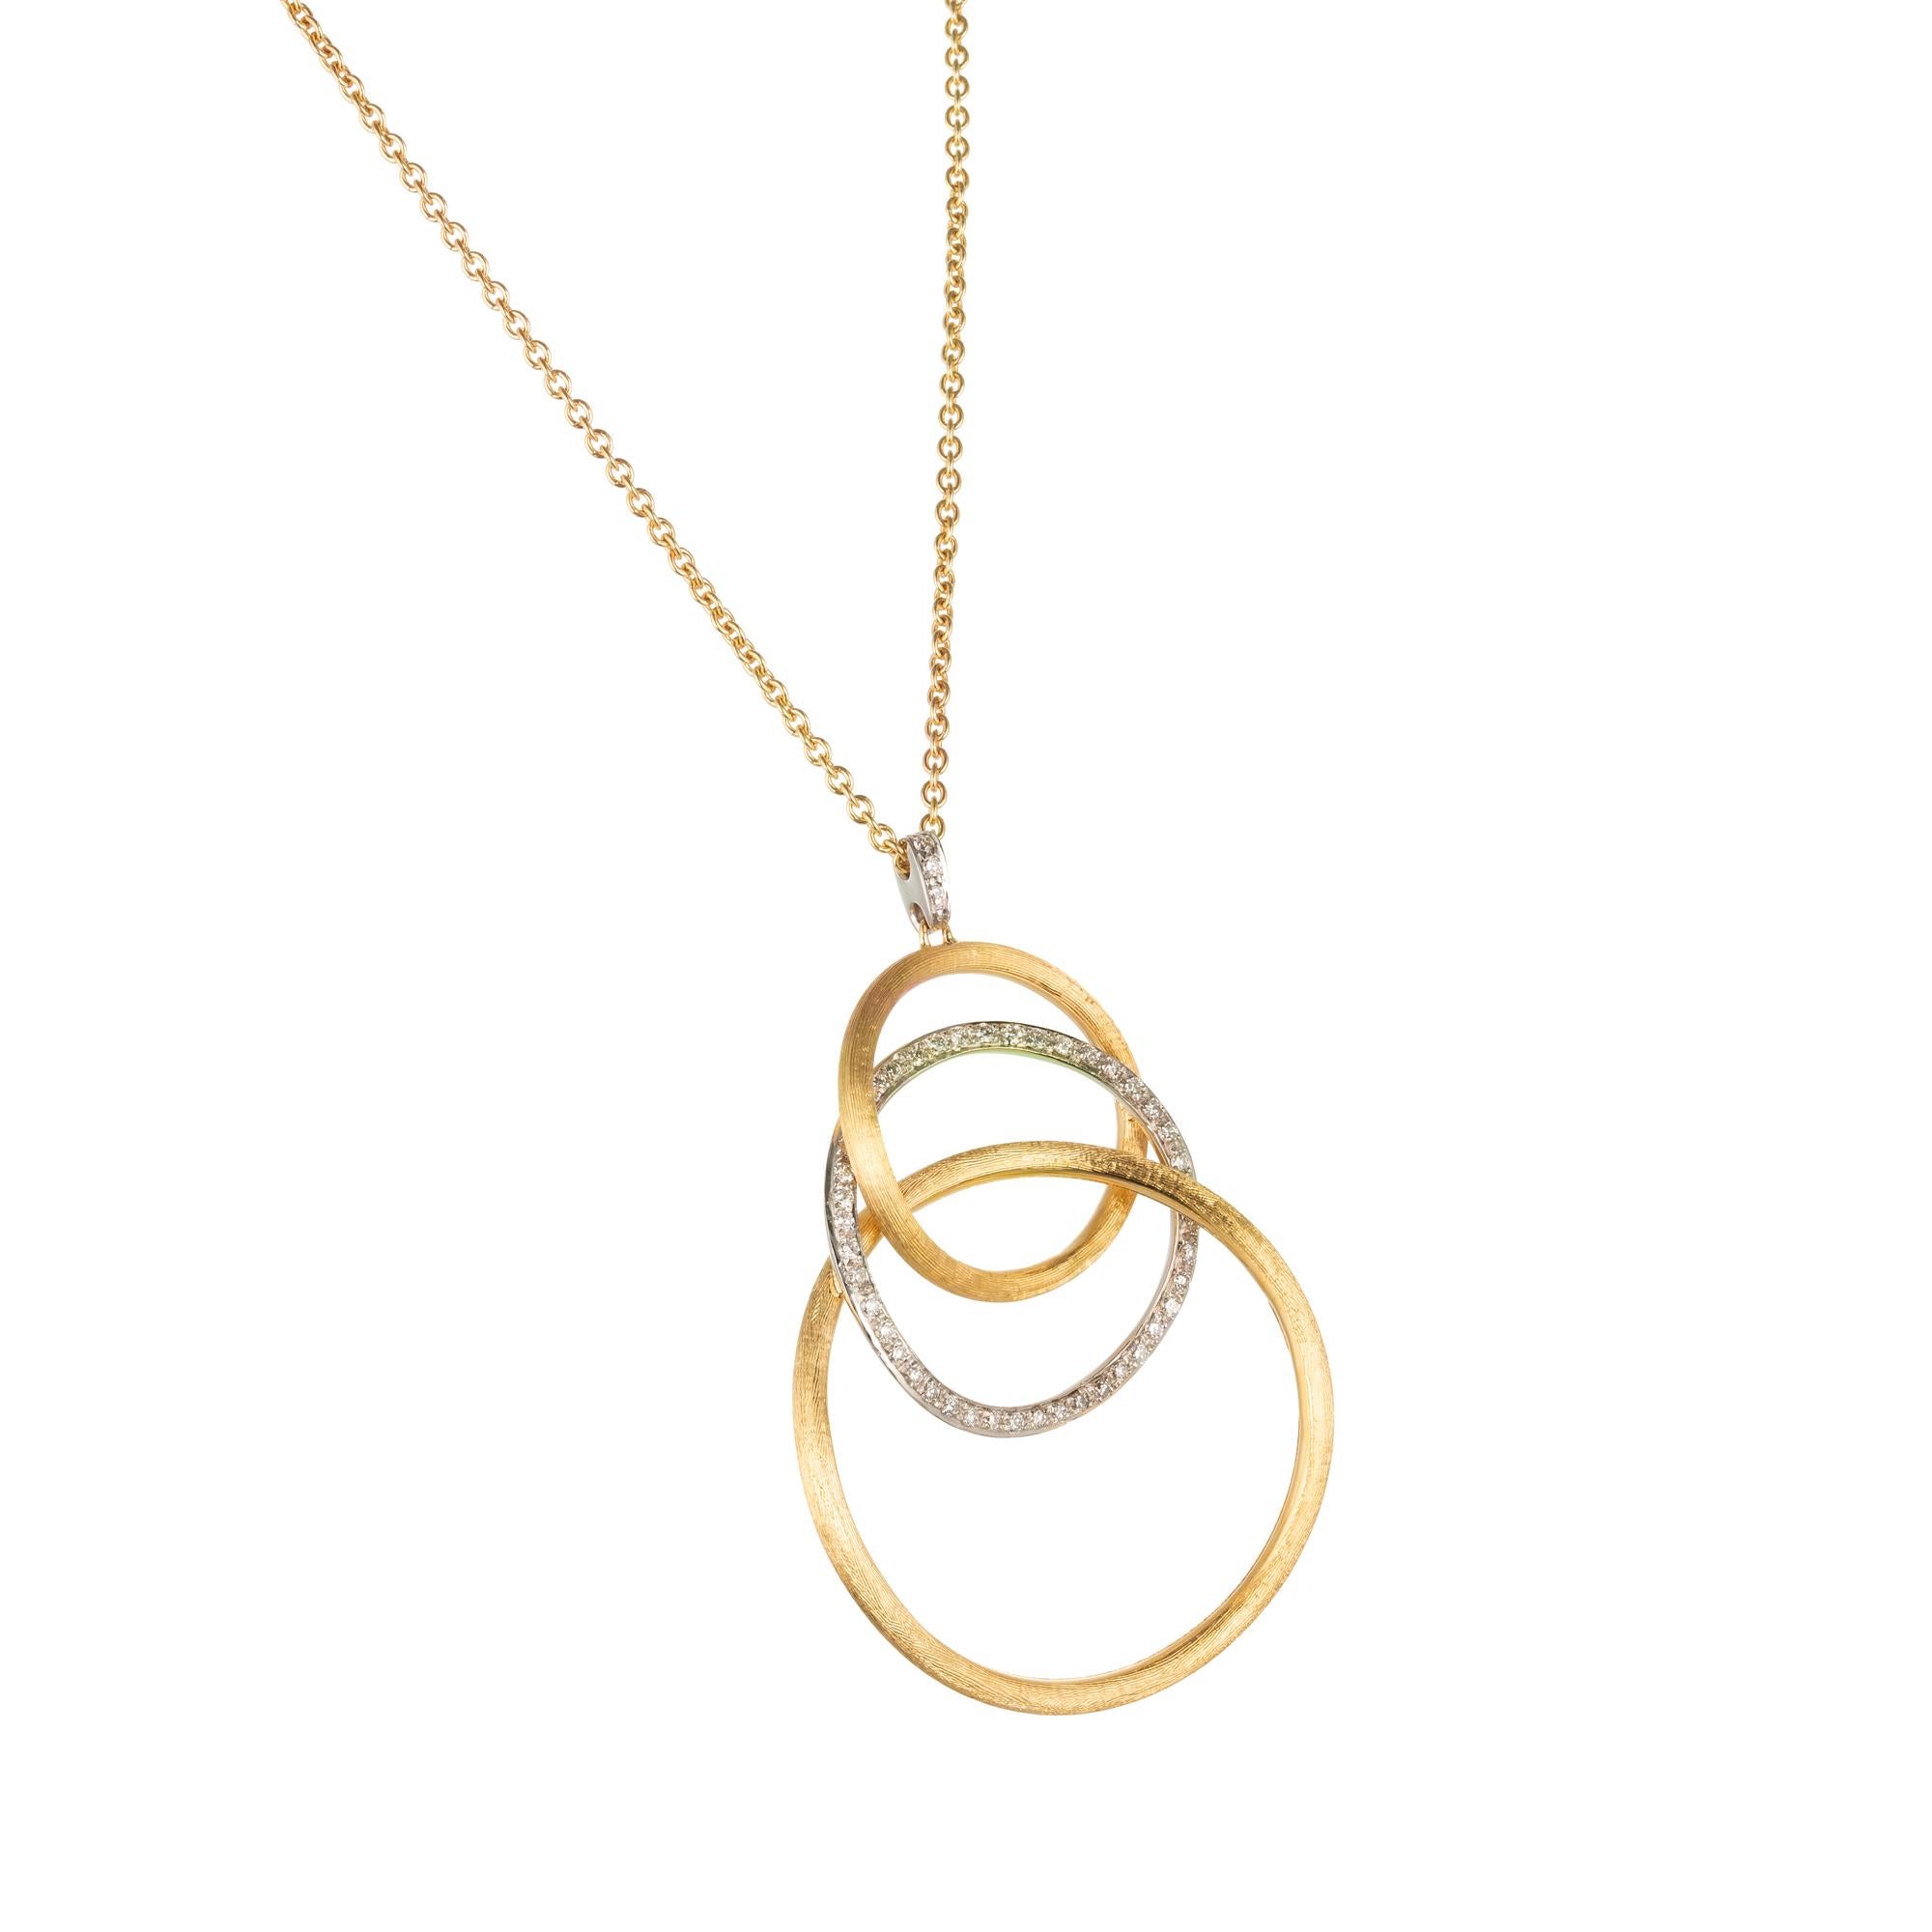 Marco Bicego 18k yellow and white gold diamond circle pendant from the Jaipur collection. 18k gold rings in three sizes interlink and form and elegant pendant that floats on an 18k yellow gold link chain with a lobster claw.  The middle link is pave